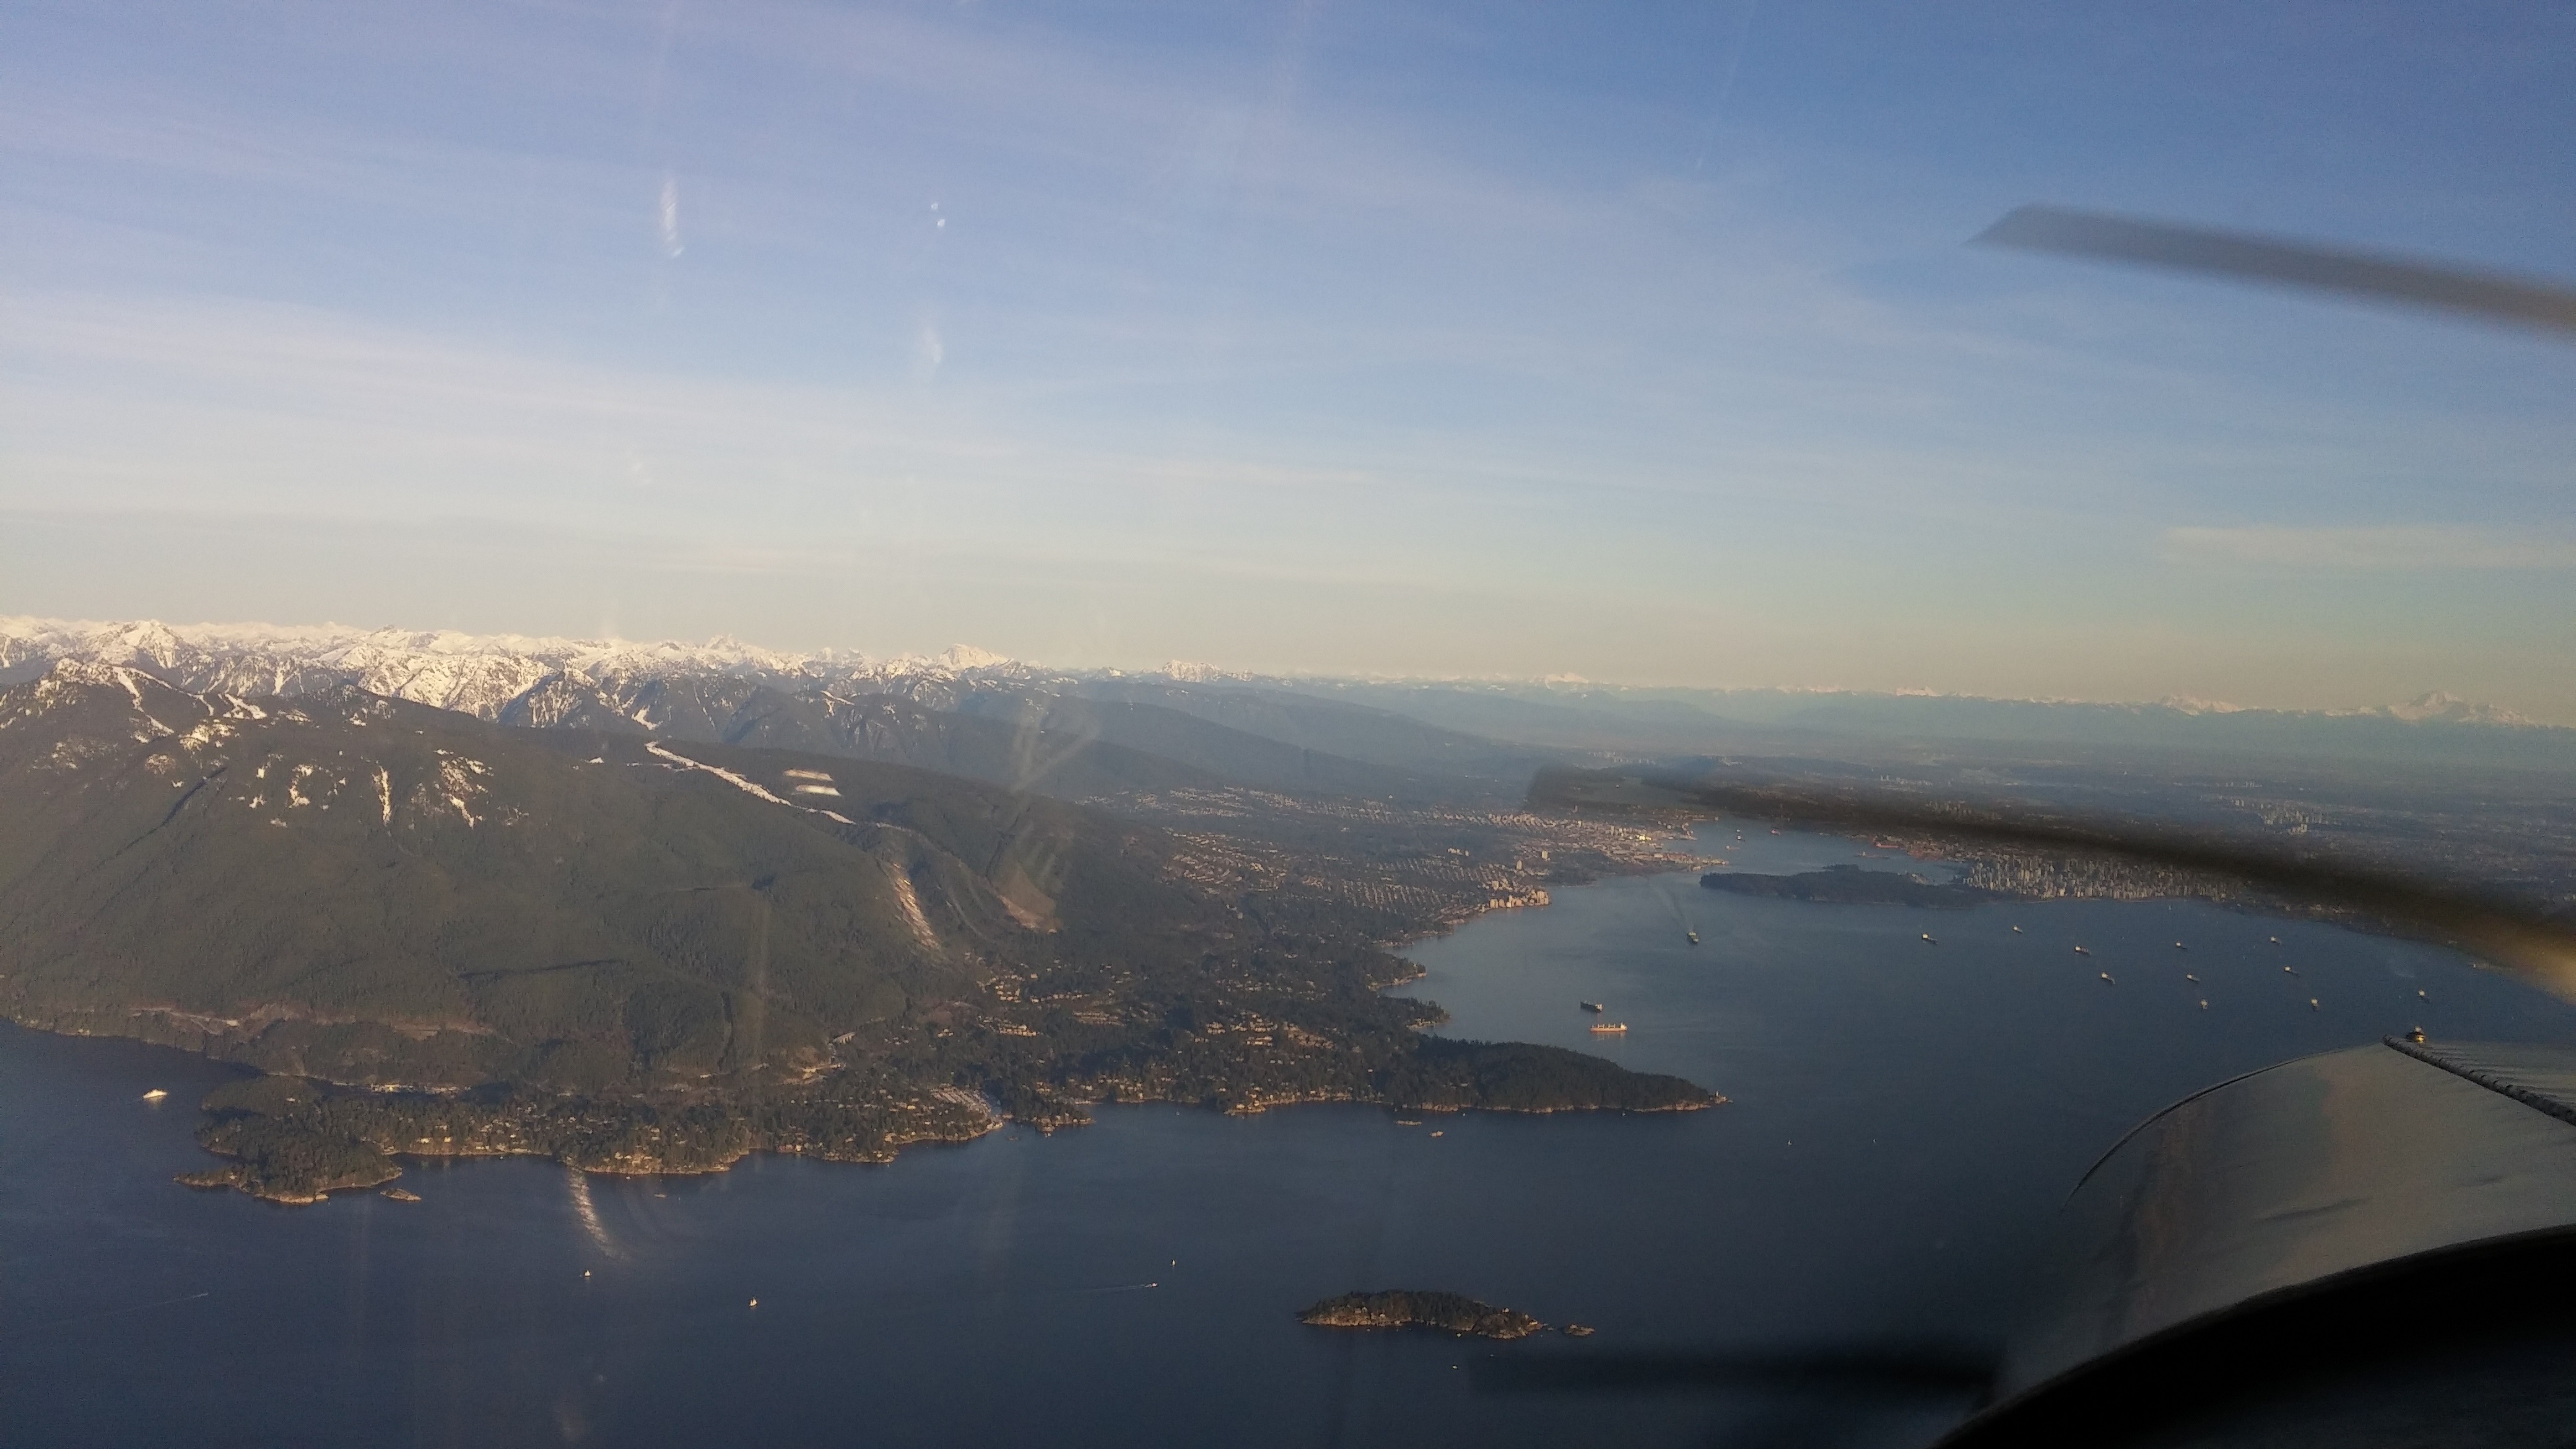 Approaching Vancouver Harbour at 5500' (talking to Terminal)